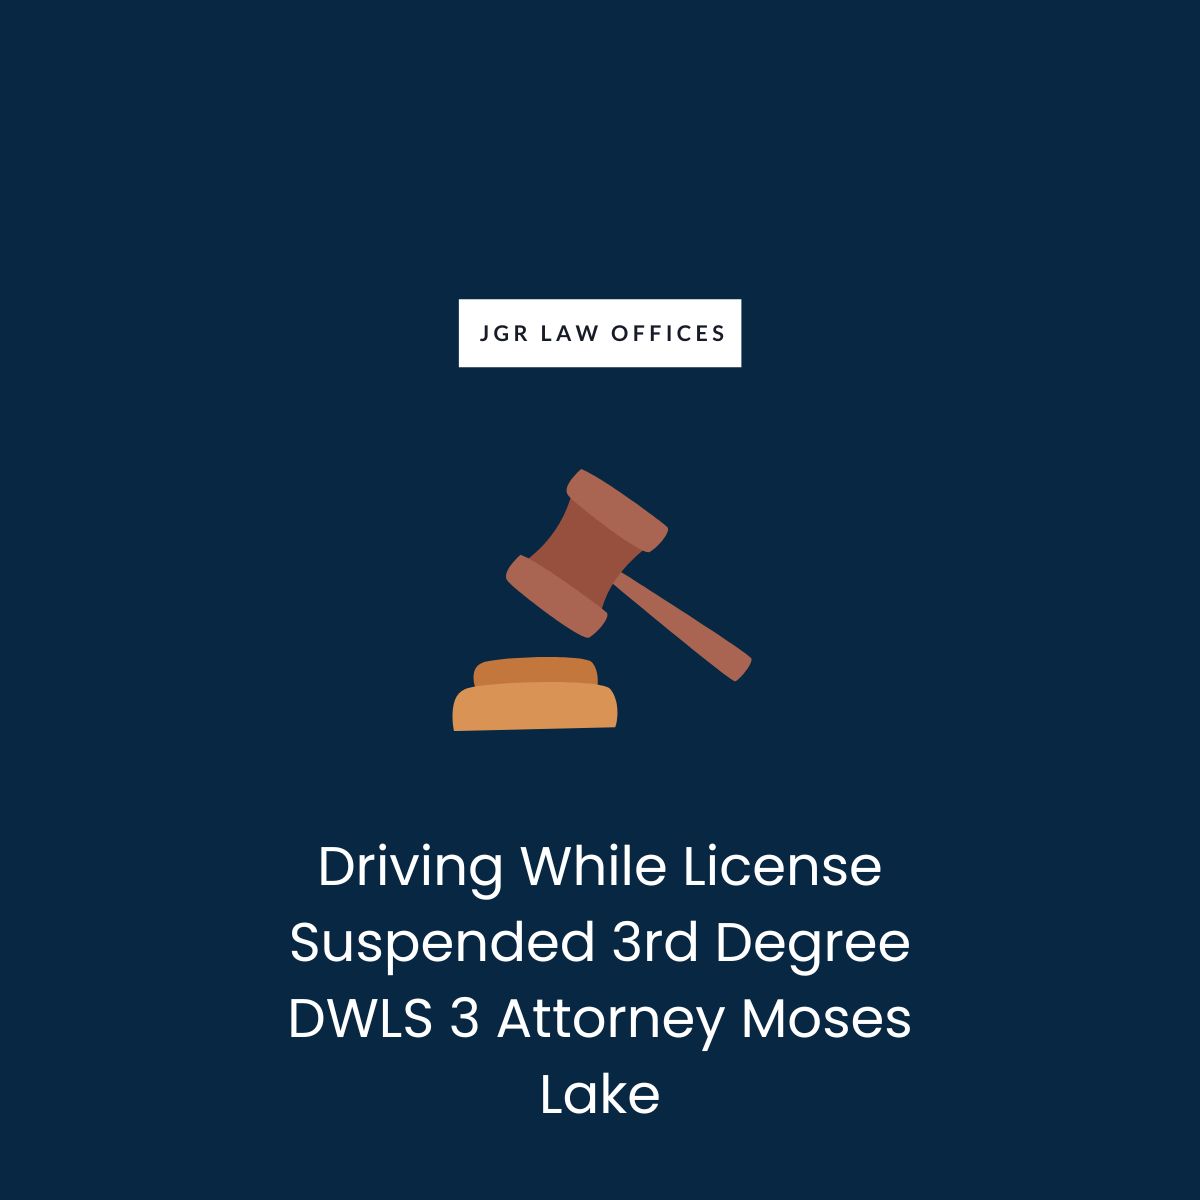 Driving While License Suspended 3rd Degree DWLS 3 Attorney Moses Lake Driving While License Suspended 3rd Degree DWLS 3 Driving While License Suspended 3rd Degree DWLS 3